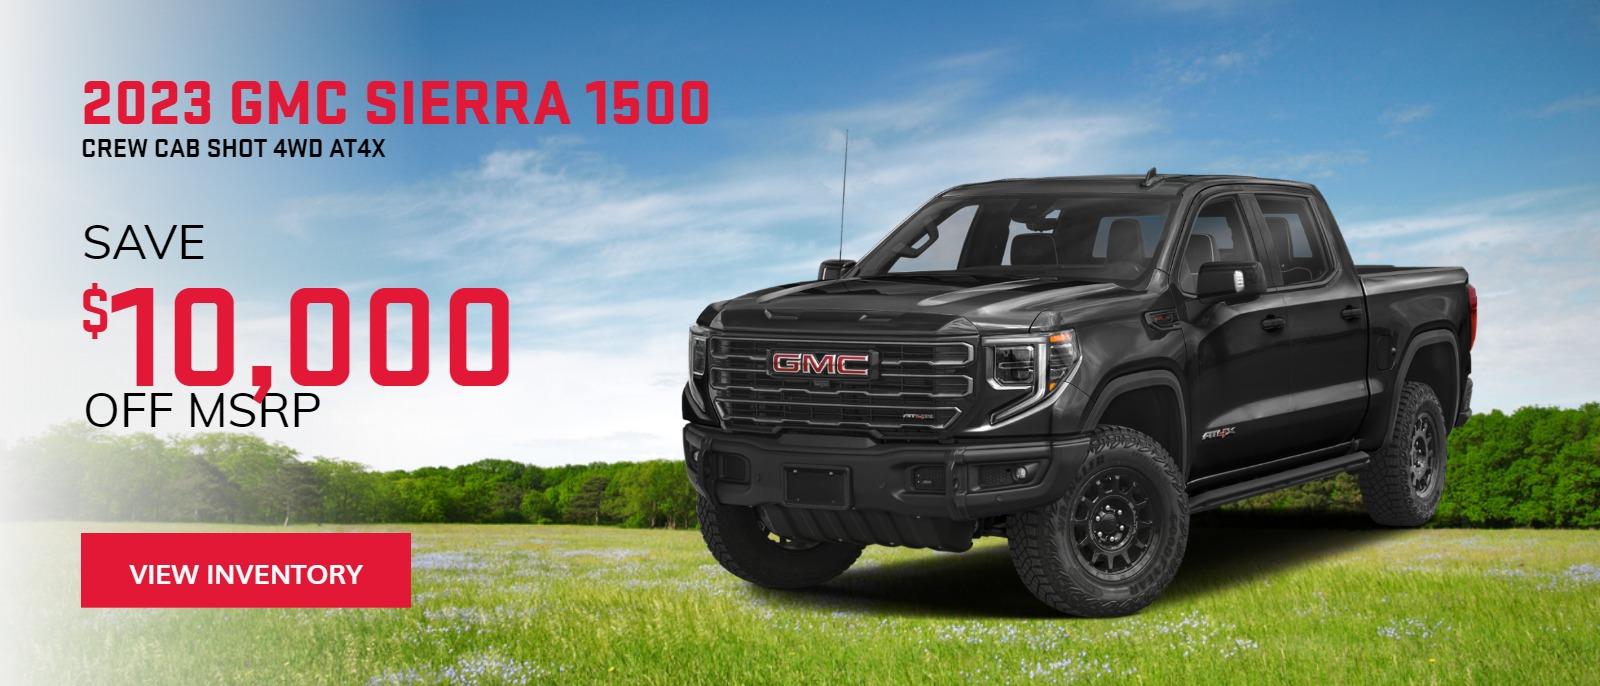 2023 GMC SIERRA 1500 CREW CAB SHOT 4WD AT4X
G233066 - SAVE $10,000 OFF MSRP!